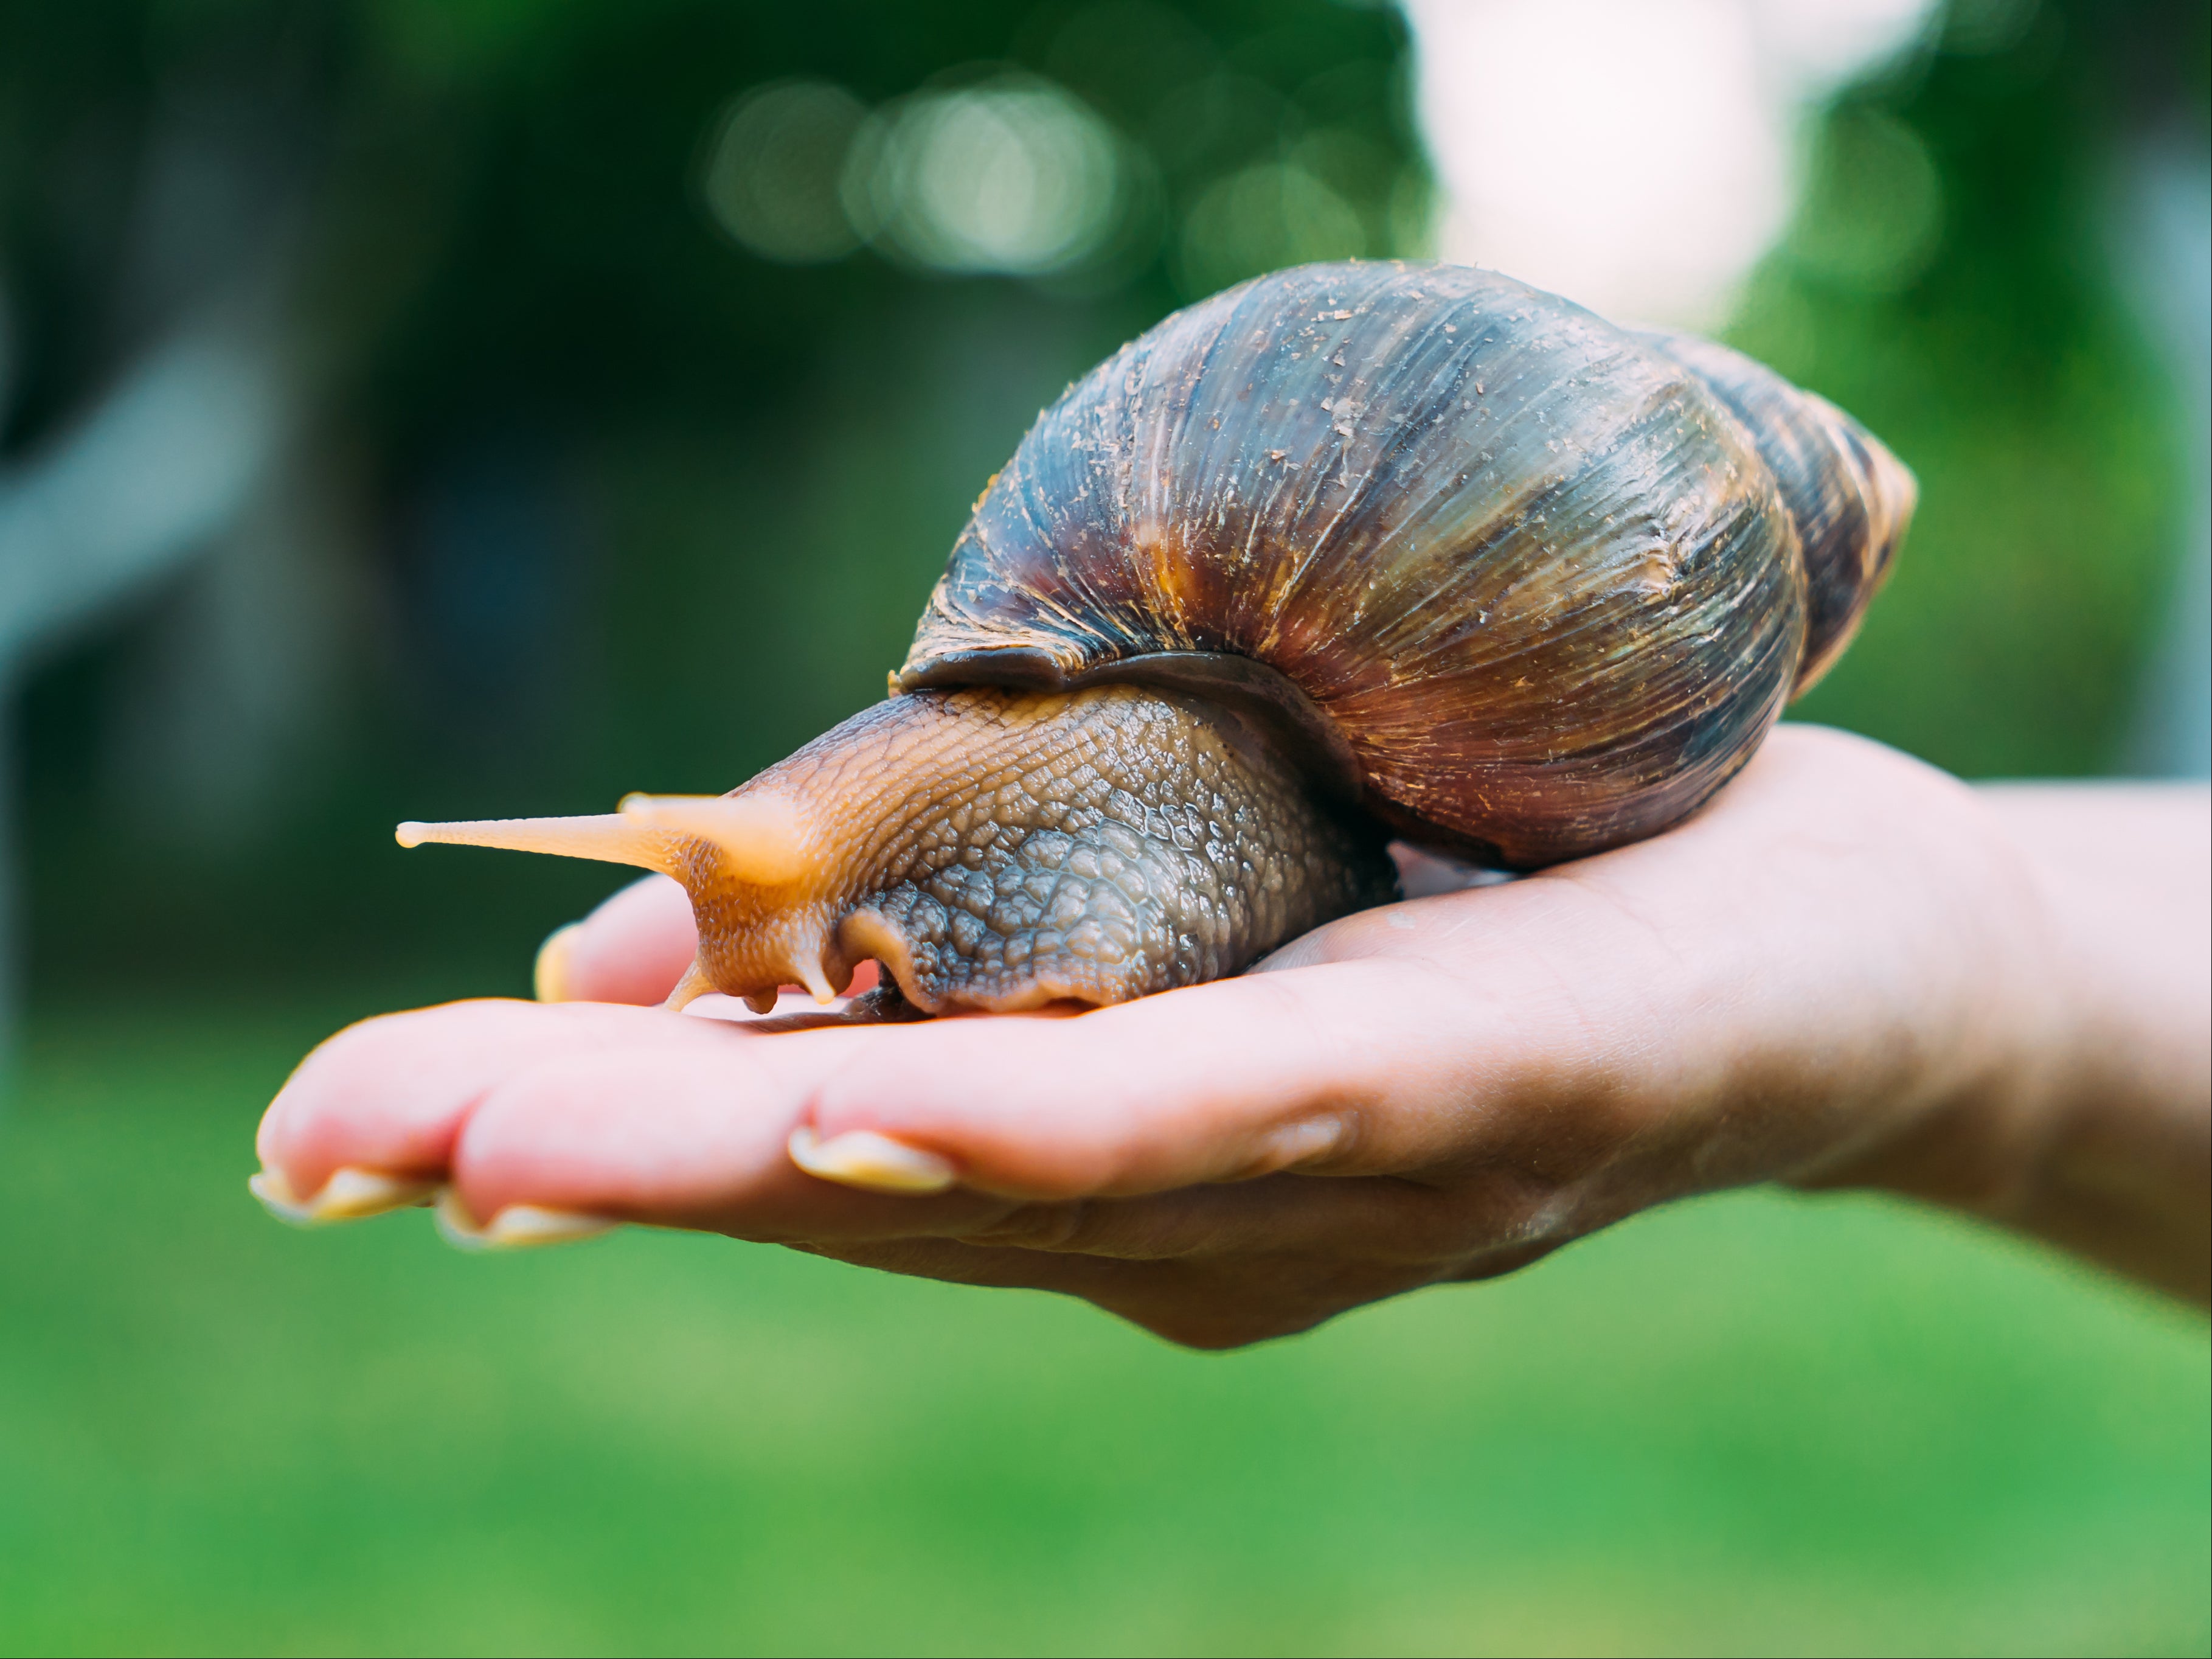 The giant African land snail can grow up to 8 inches long